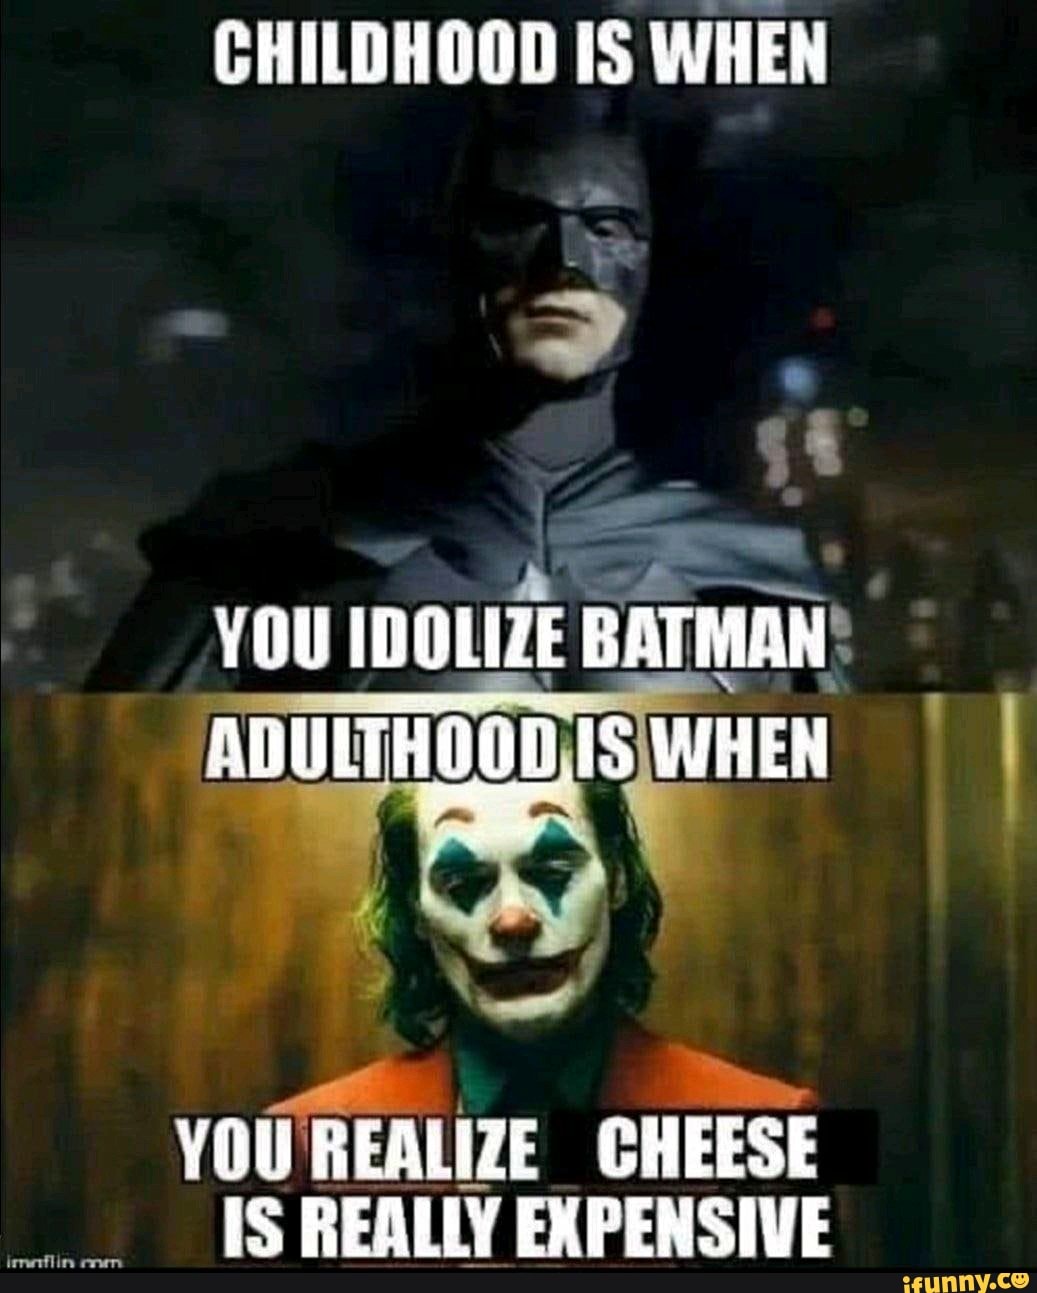 CHILDHOOD WHEN IDOLIZE BATMAN ADULTHOGD IS WHEN YOU REALIZE CHEESE IS ...